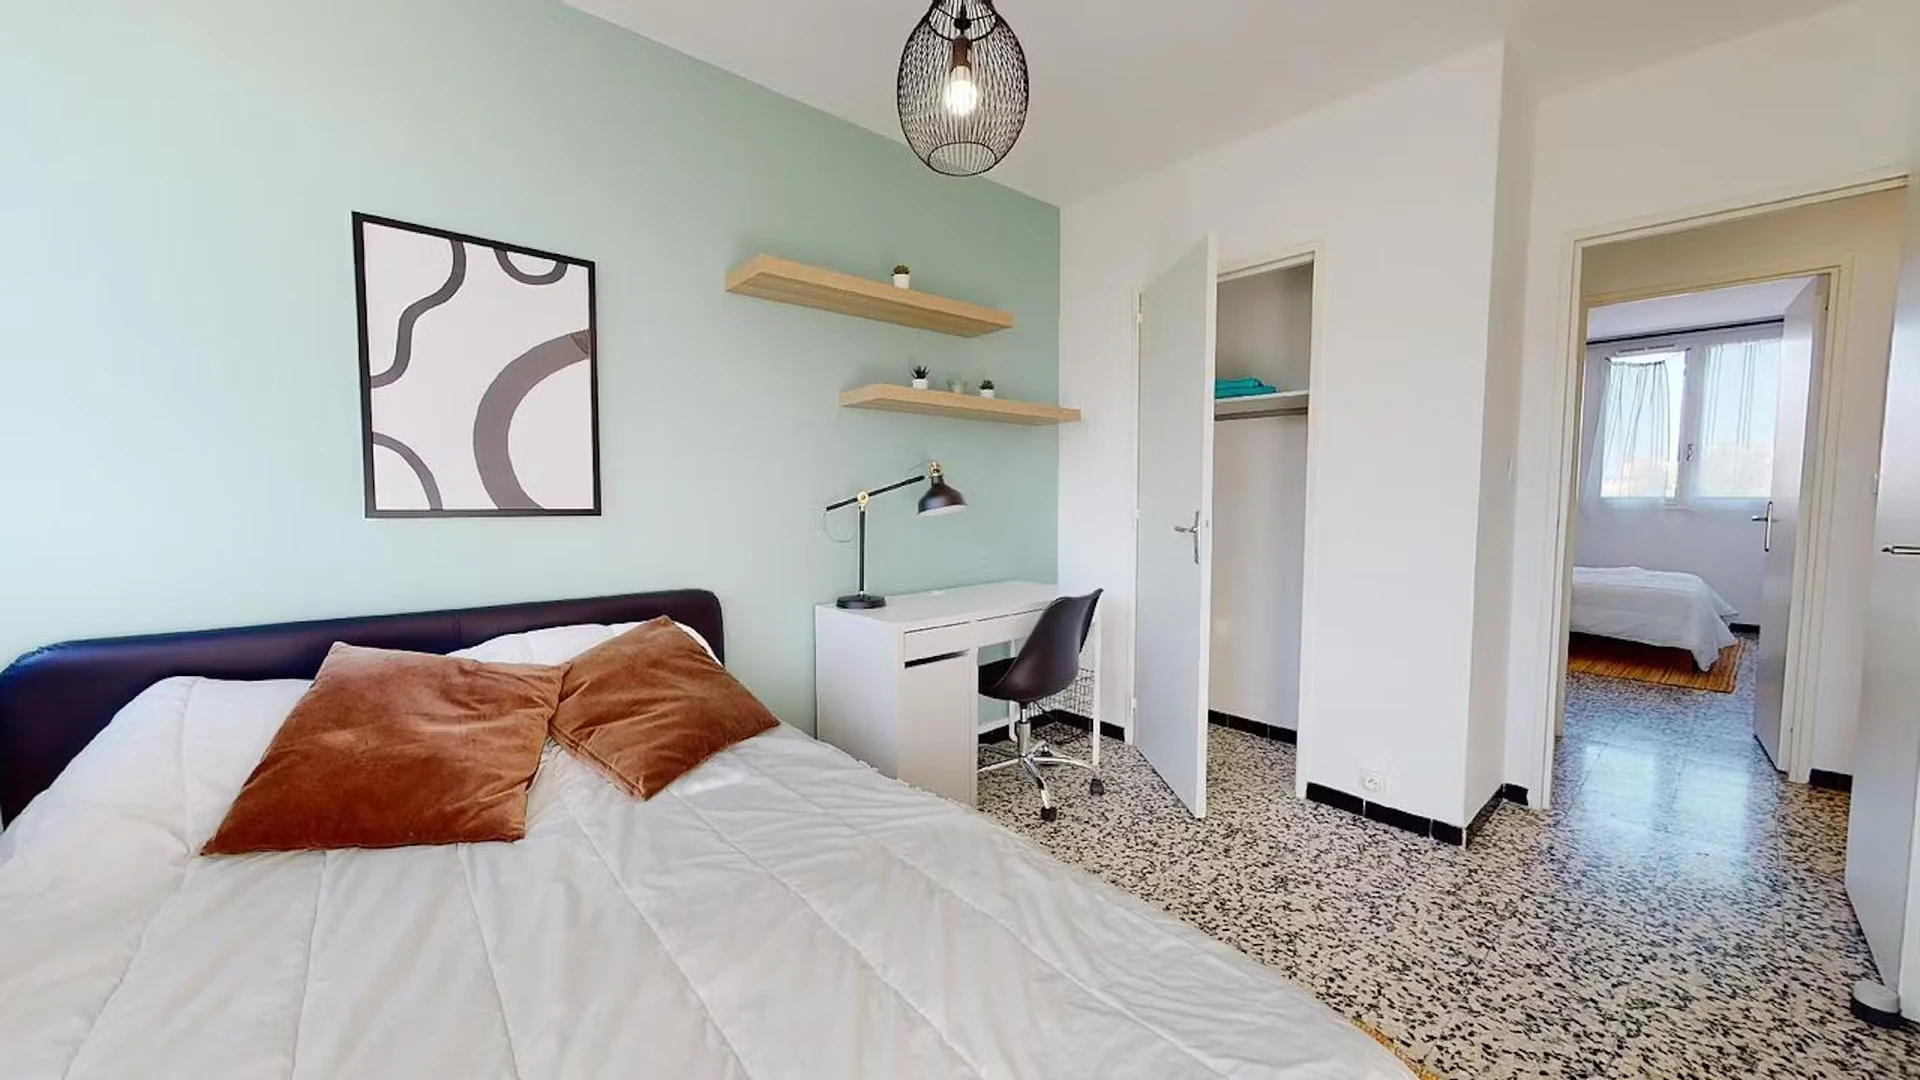 Renting rooms by the month in Avignon